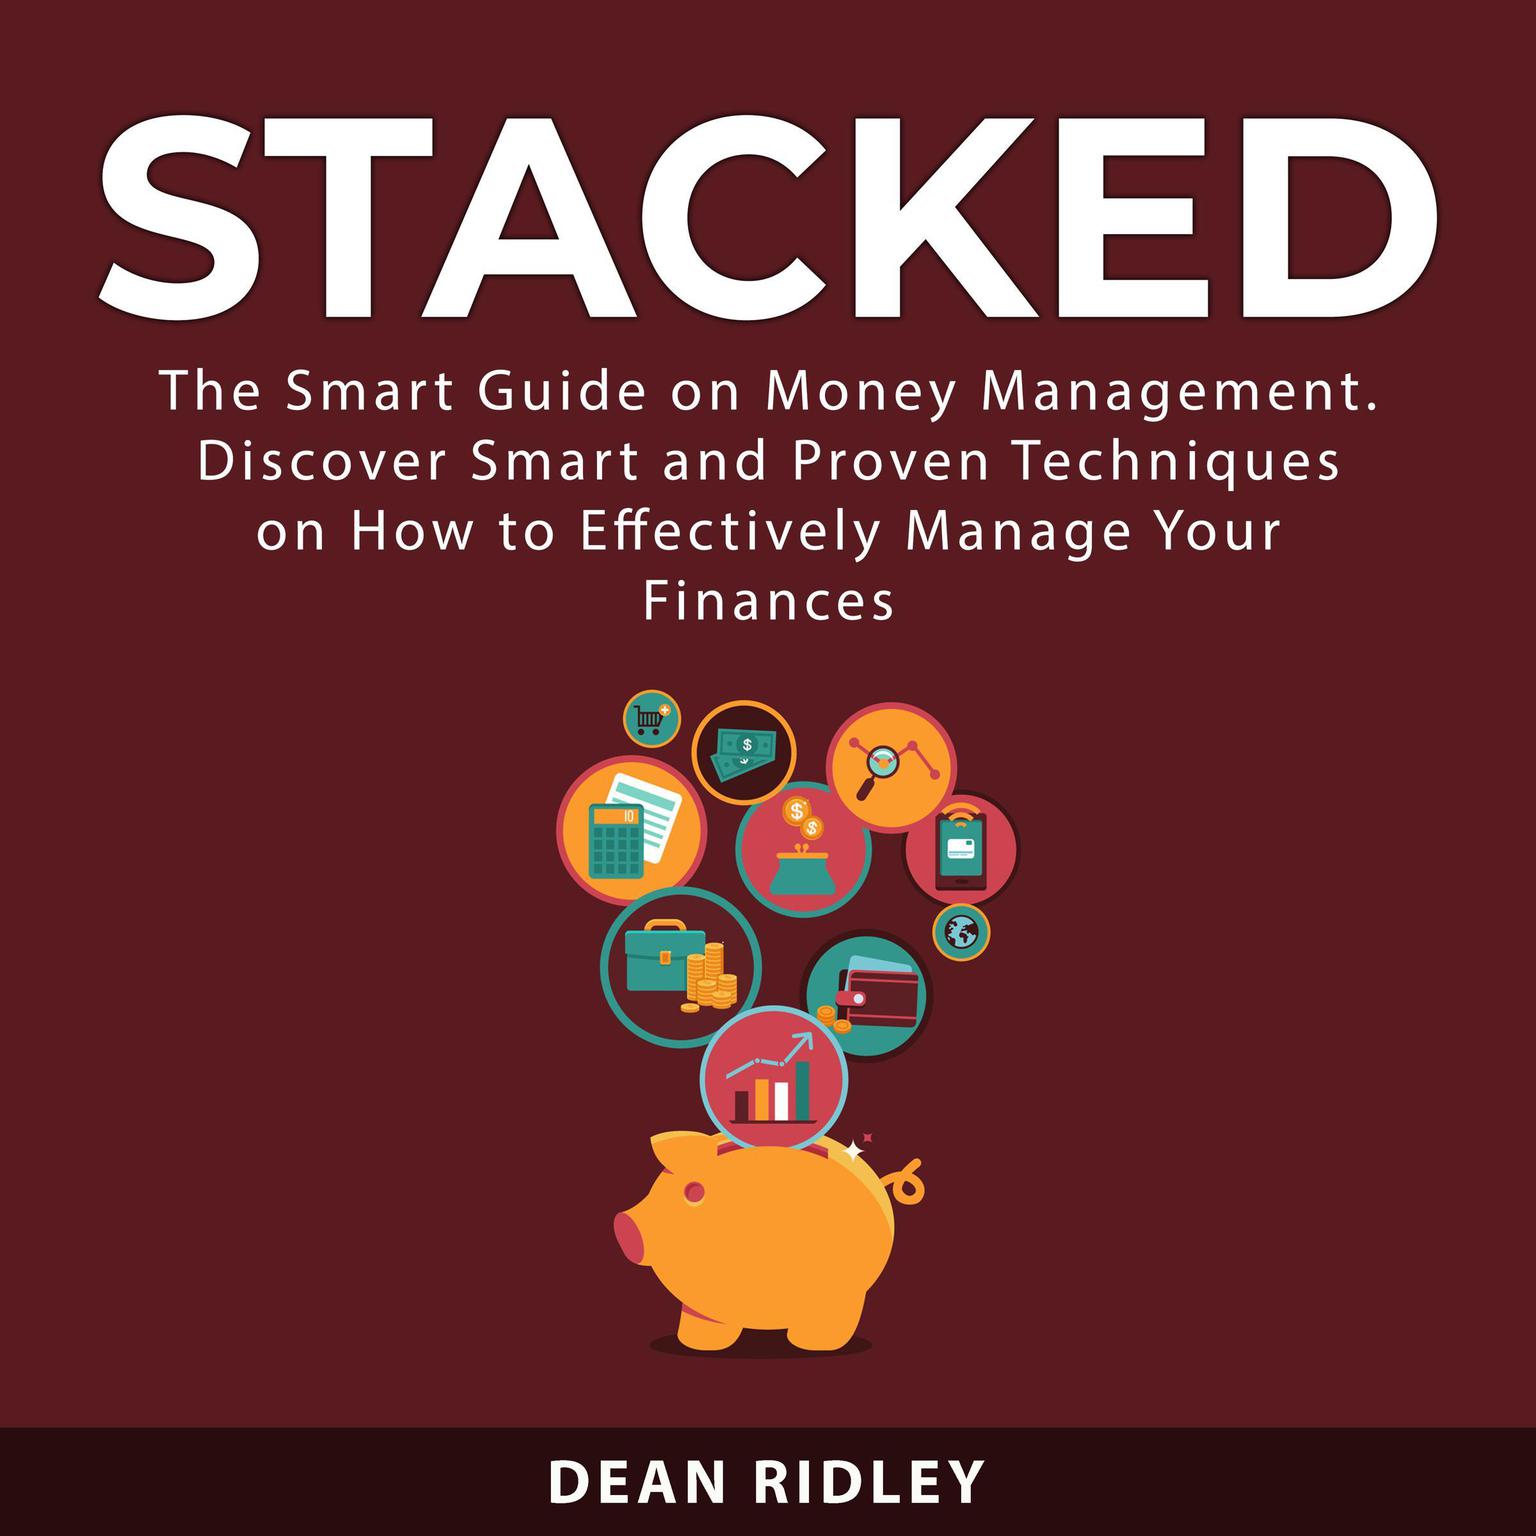 Stacked: The Smart Guide on Money Management. Discover Smart and Proven Techniques on How to Effectively Manage Your Finances Audiobook, by Dean Ridley